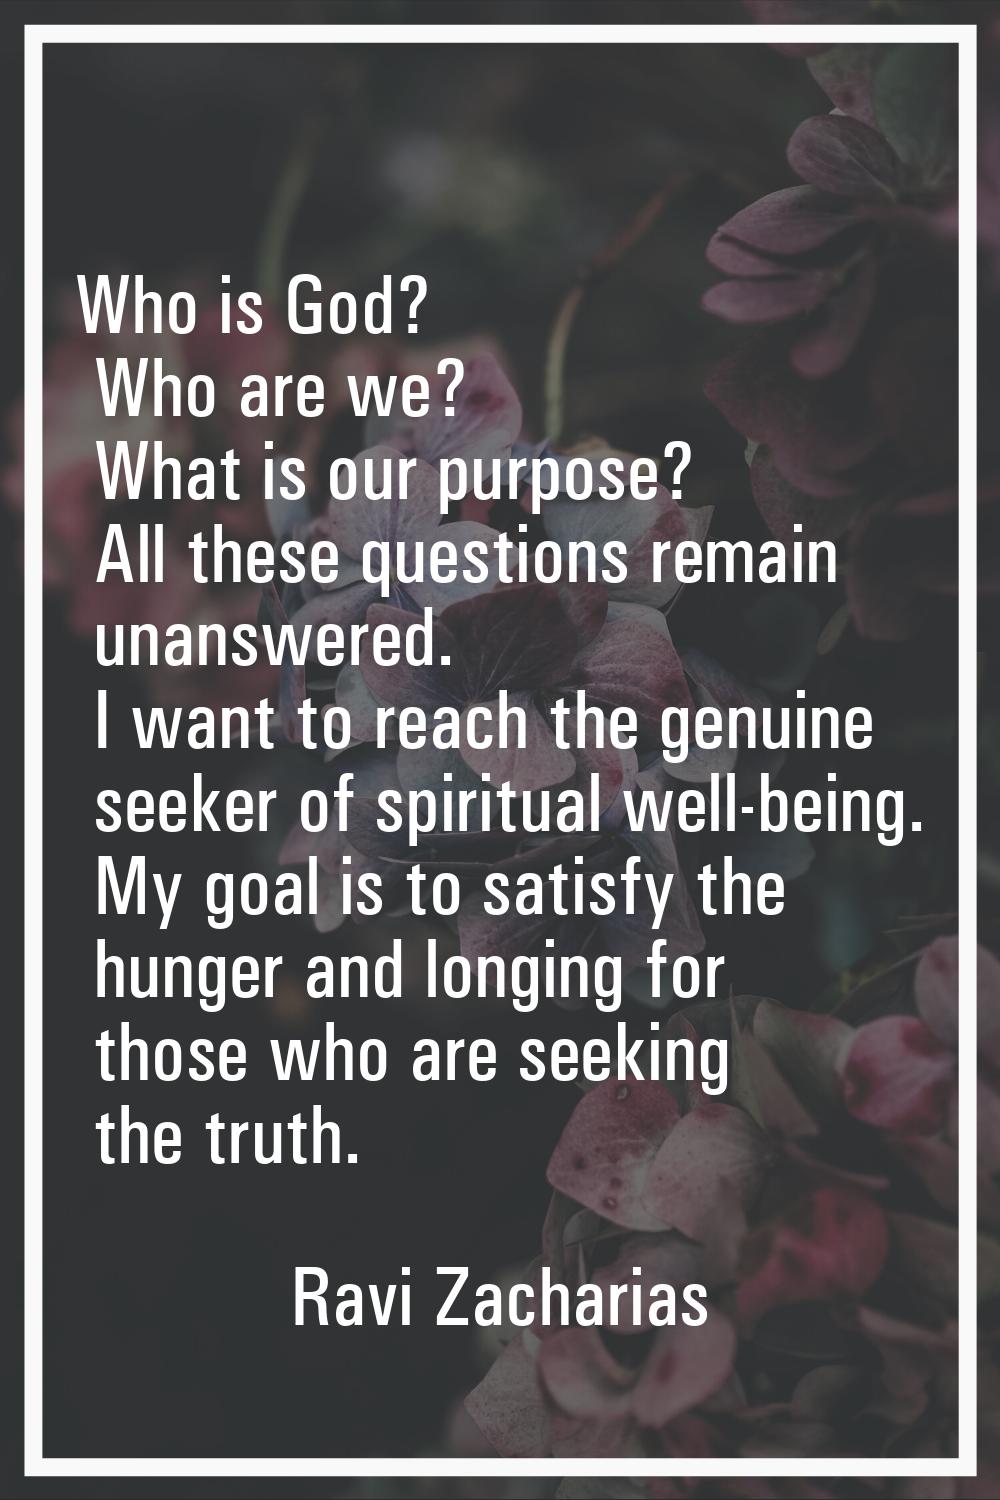 Who is God? Who are we? What is our purpose? All these questions remain unanswered. I want to reach